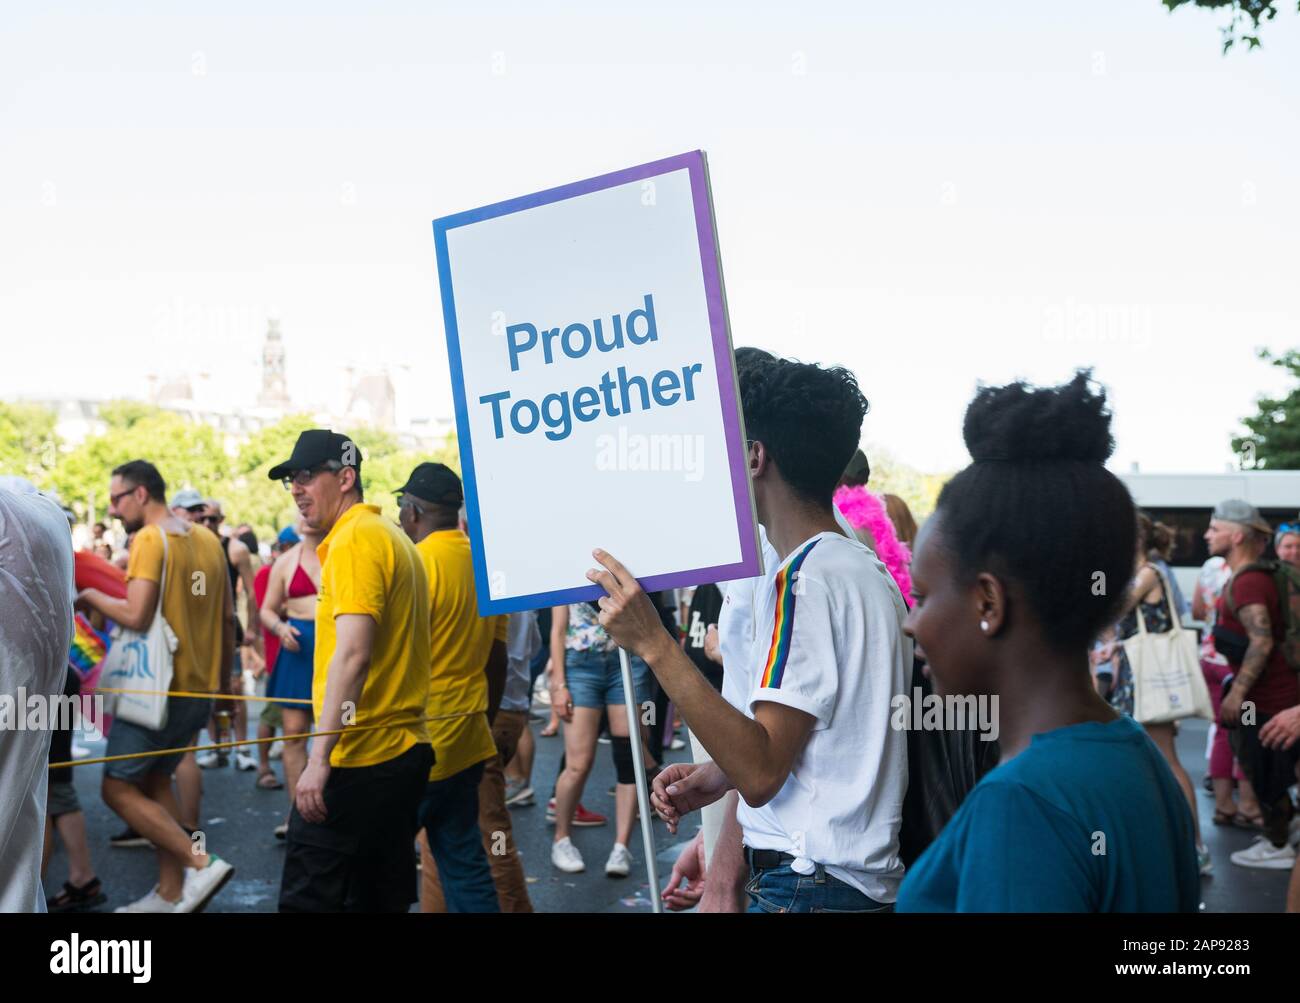 June 29 2019, Paris, France. Beautiful shot on Gay Pride Parade Day. 'Pride together'says the sign that a boy is holding in his hands through the crow Stock Photo